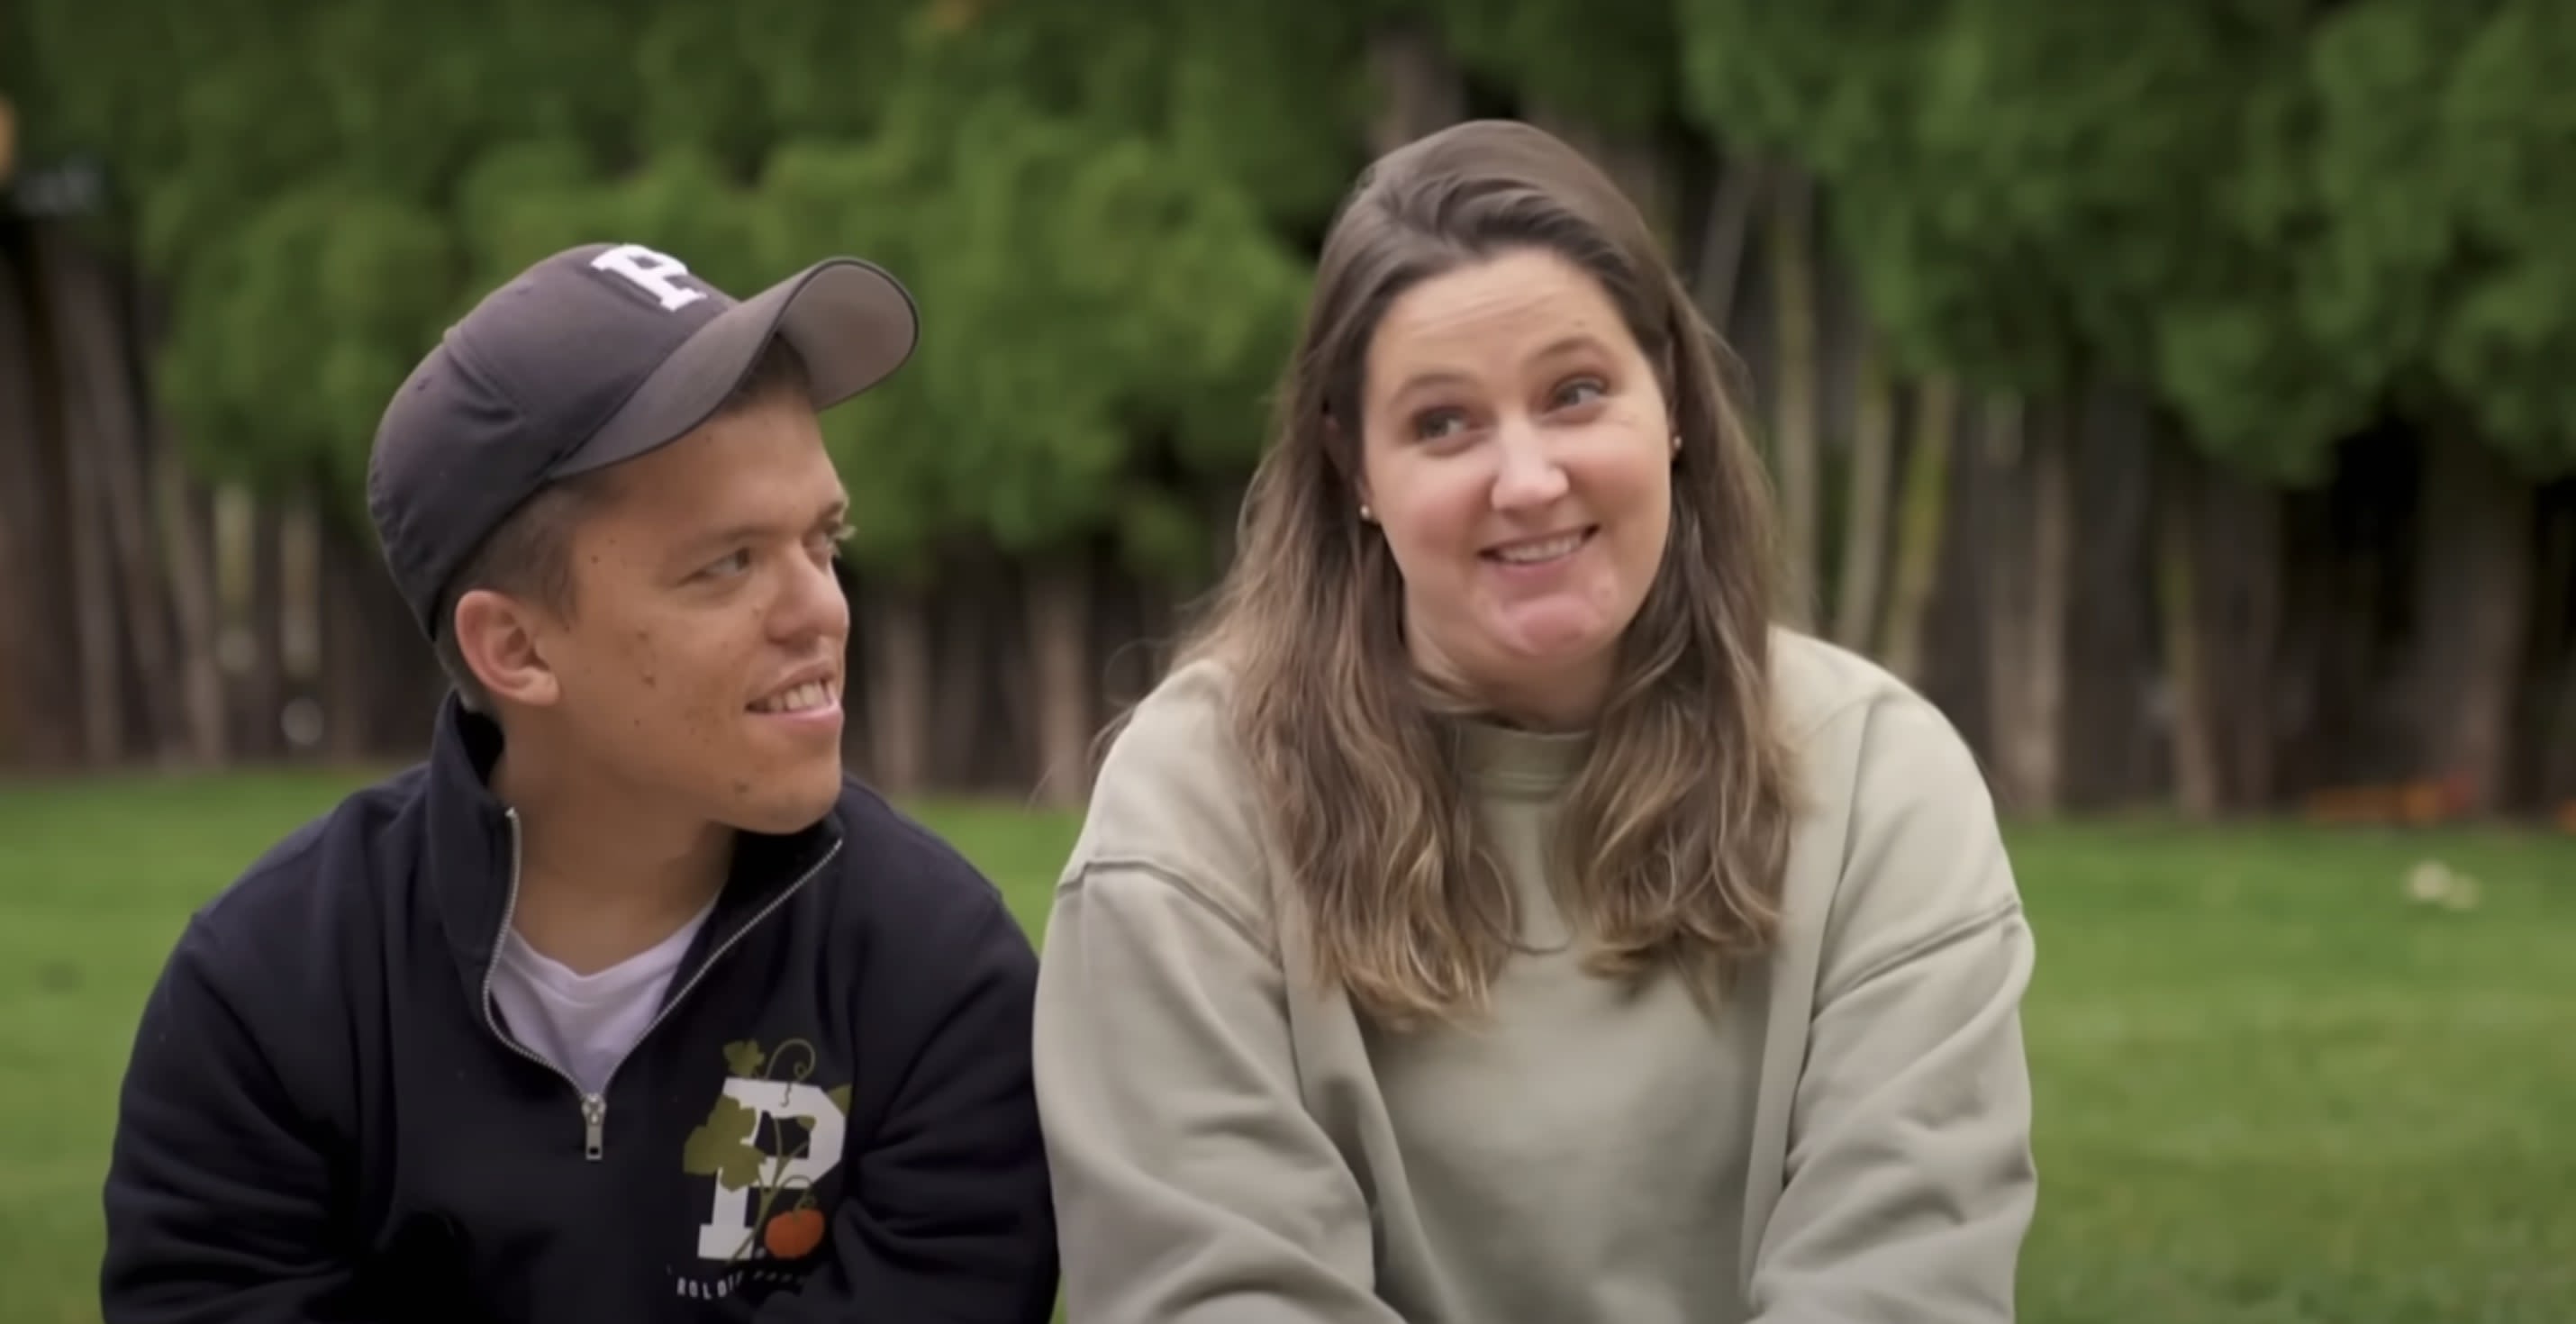 LPBW’s Tori Roloff Felt Insecure Being Husband Zach Roloff’s ‘1st Everything’ Early on in Romance